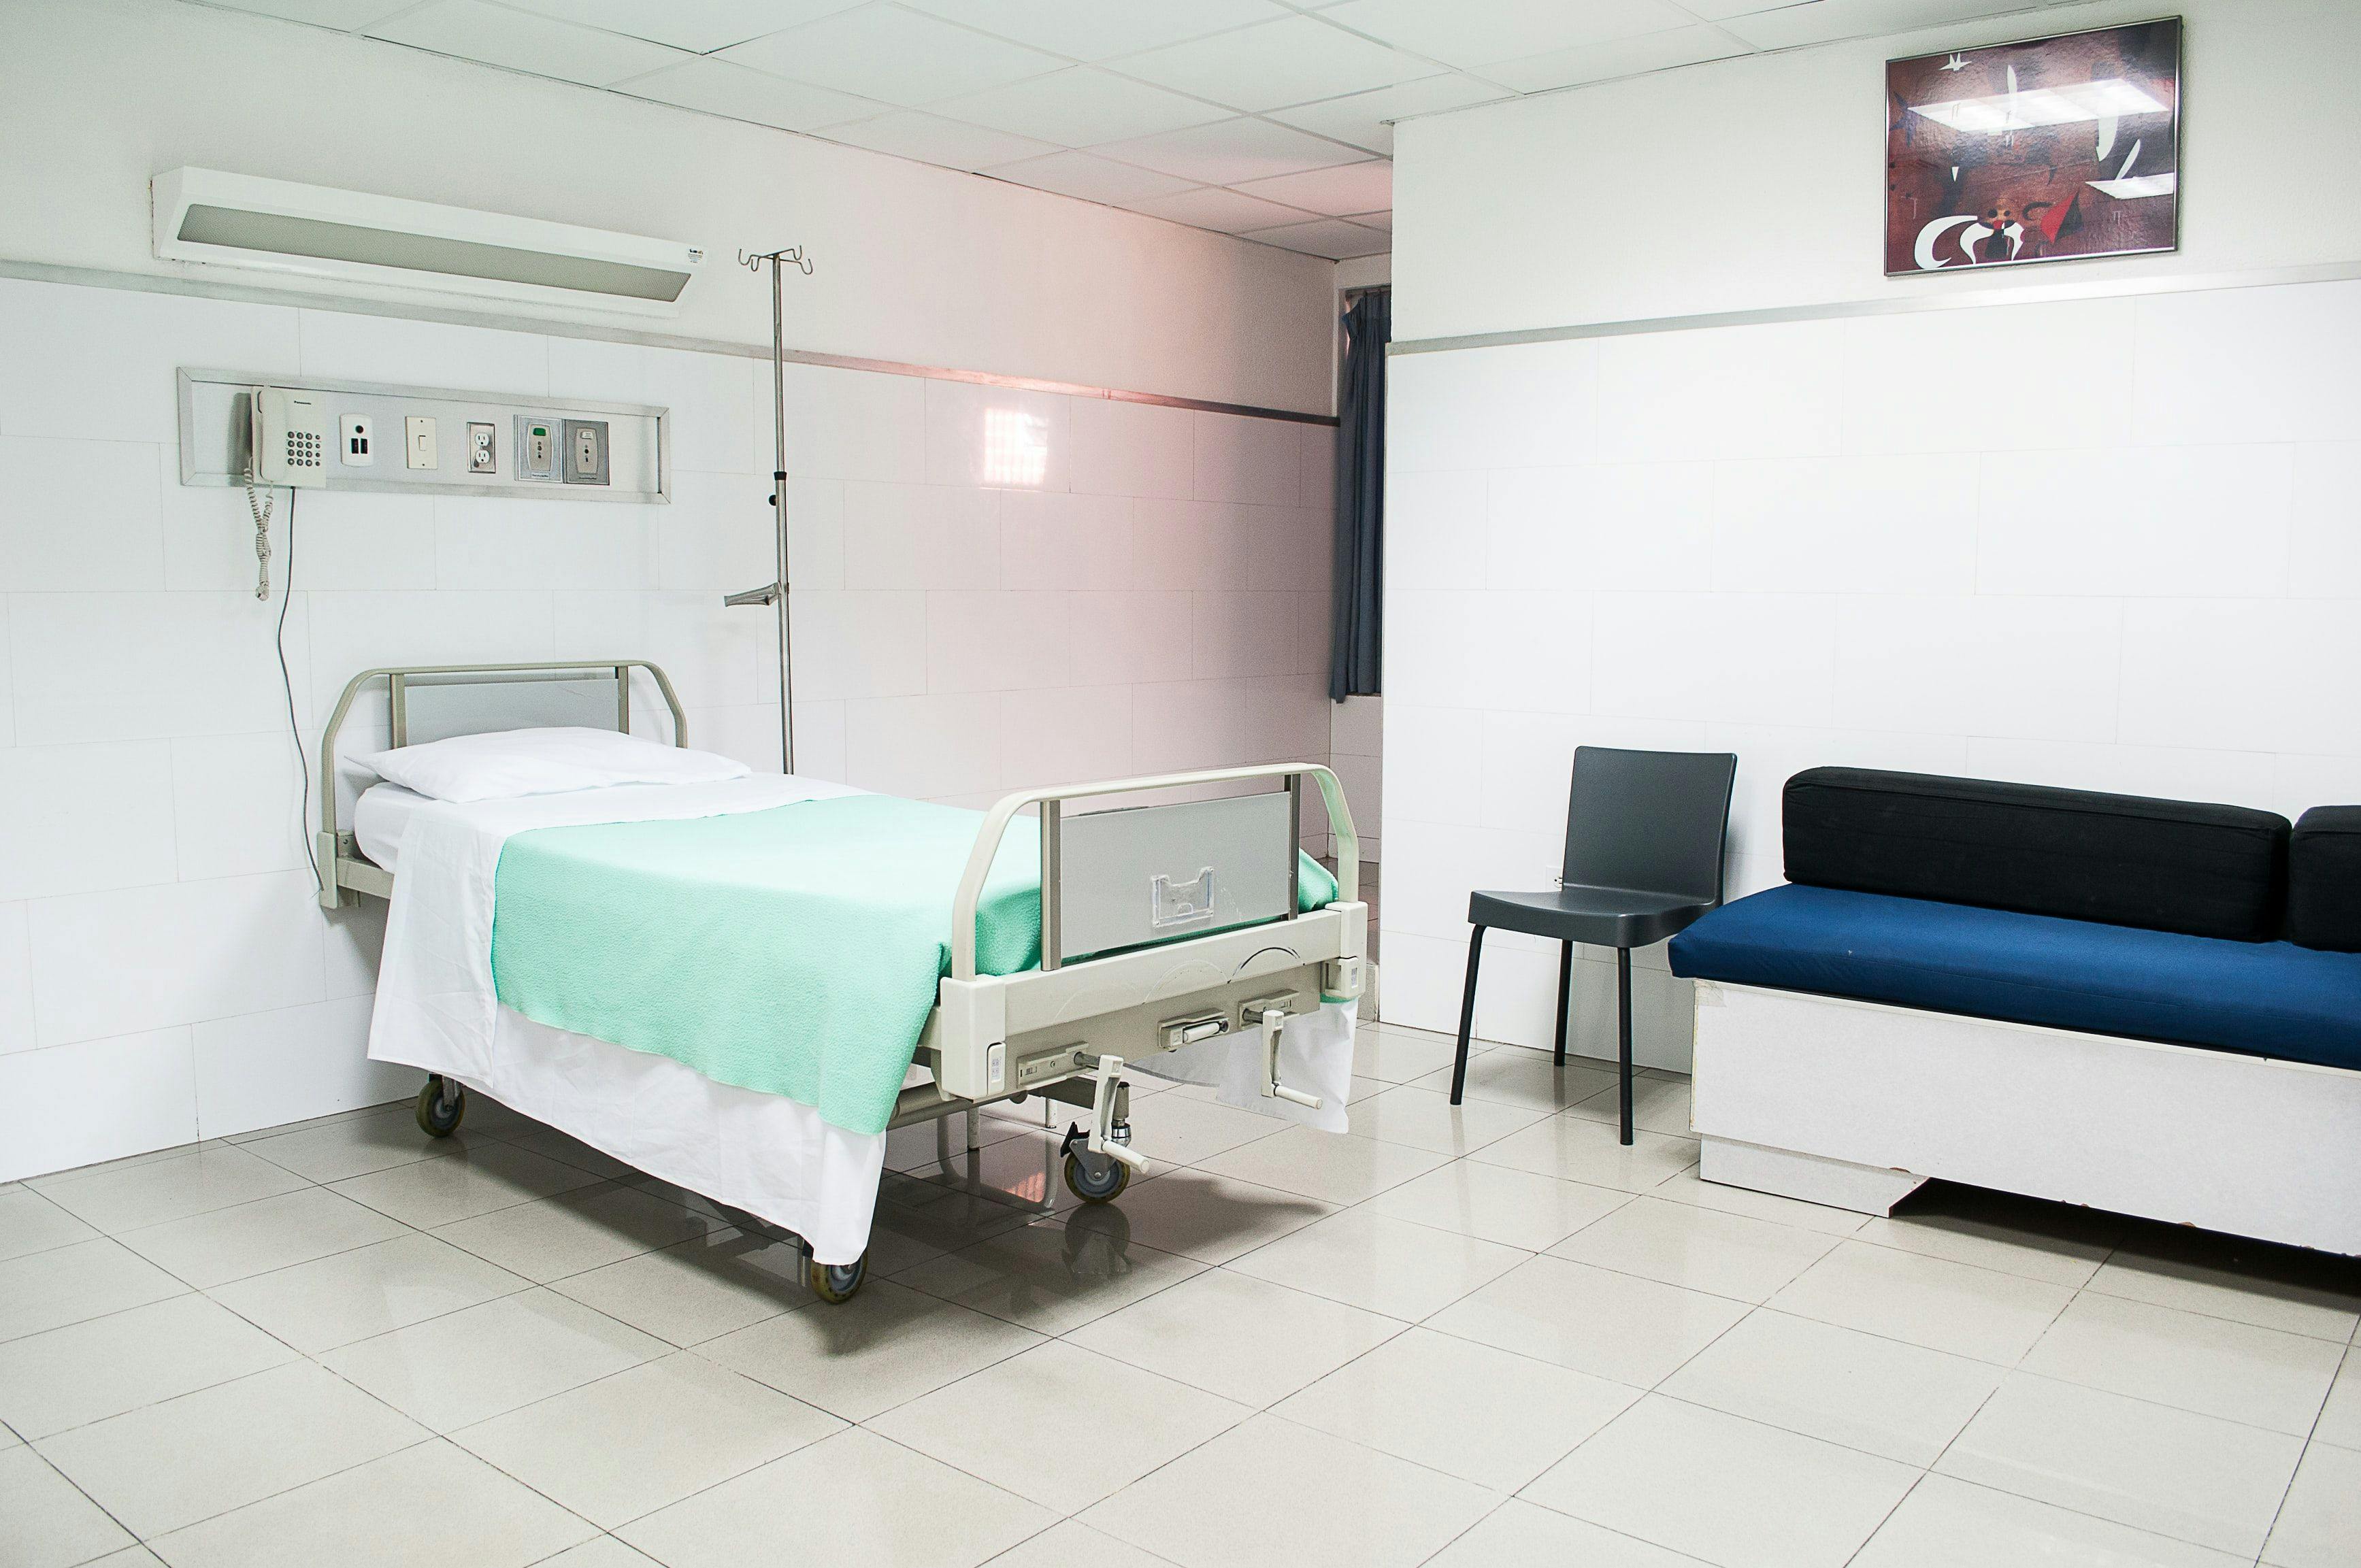 Hospitals That Use More Antibiotics May Have More C Difficile Infections